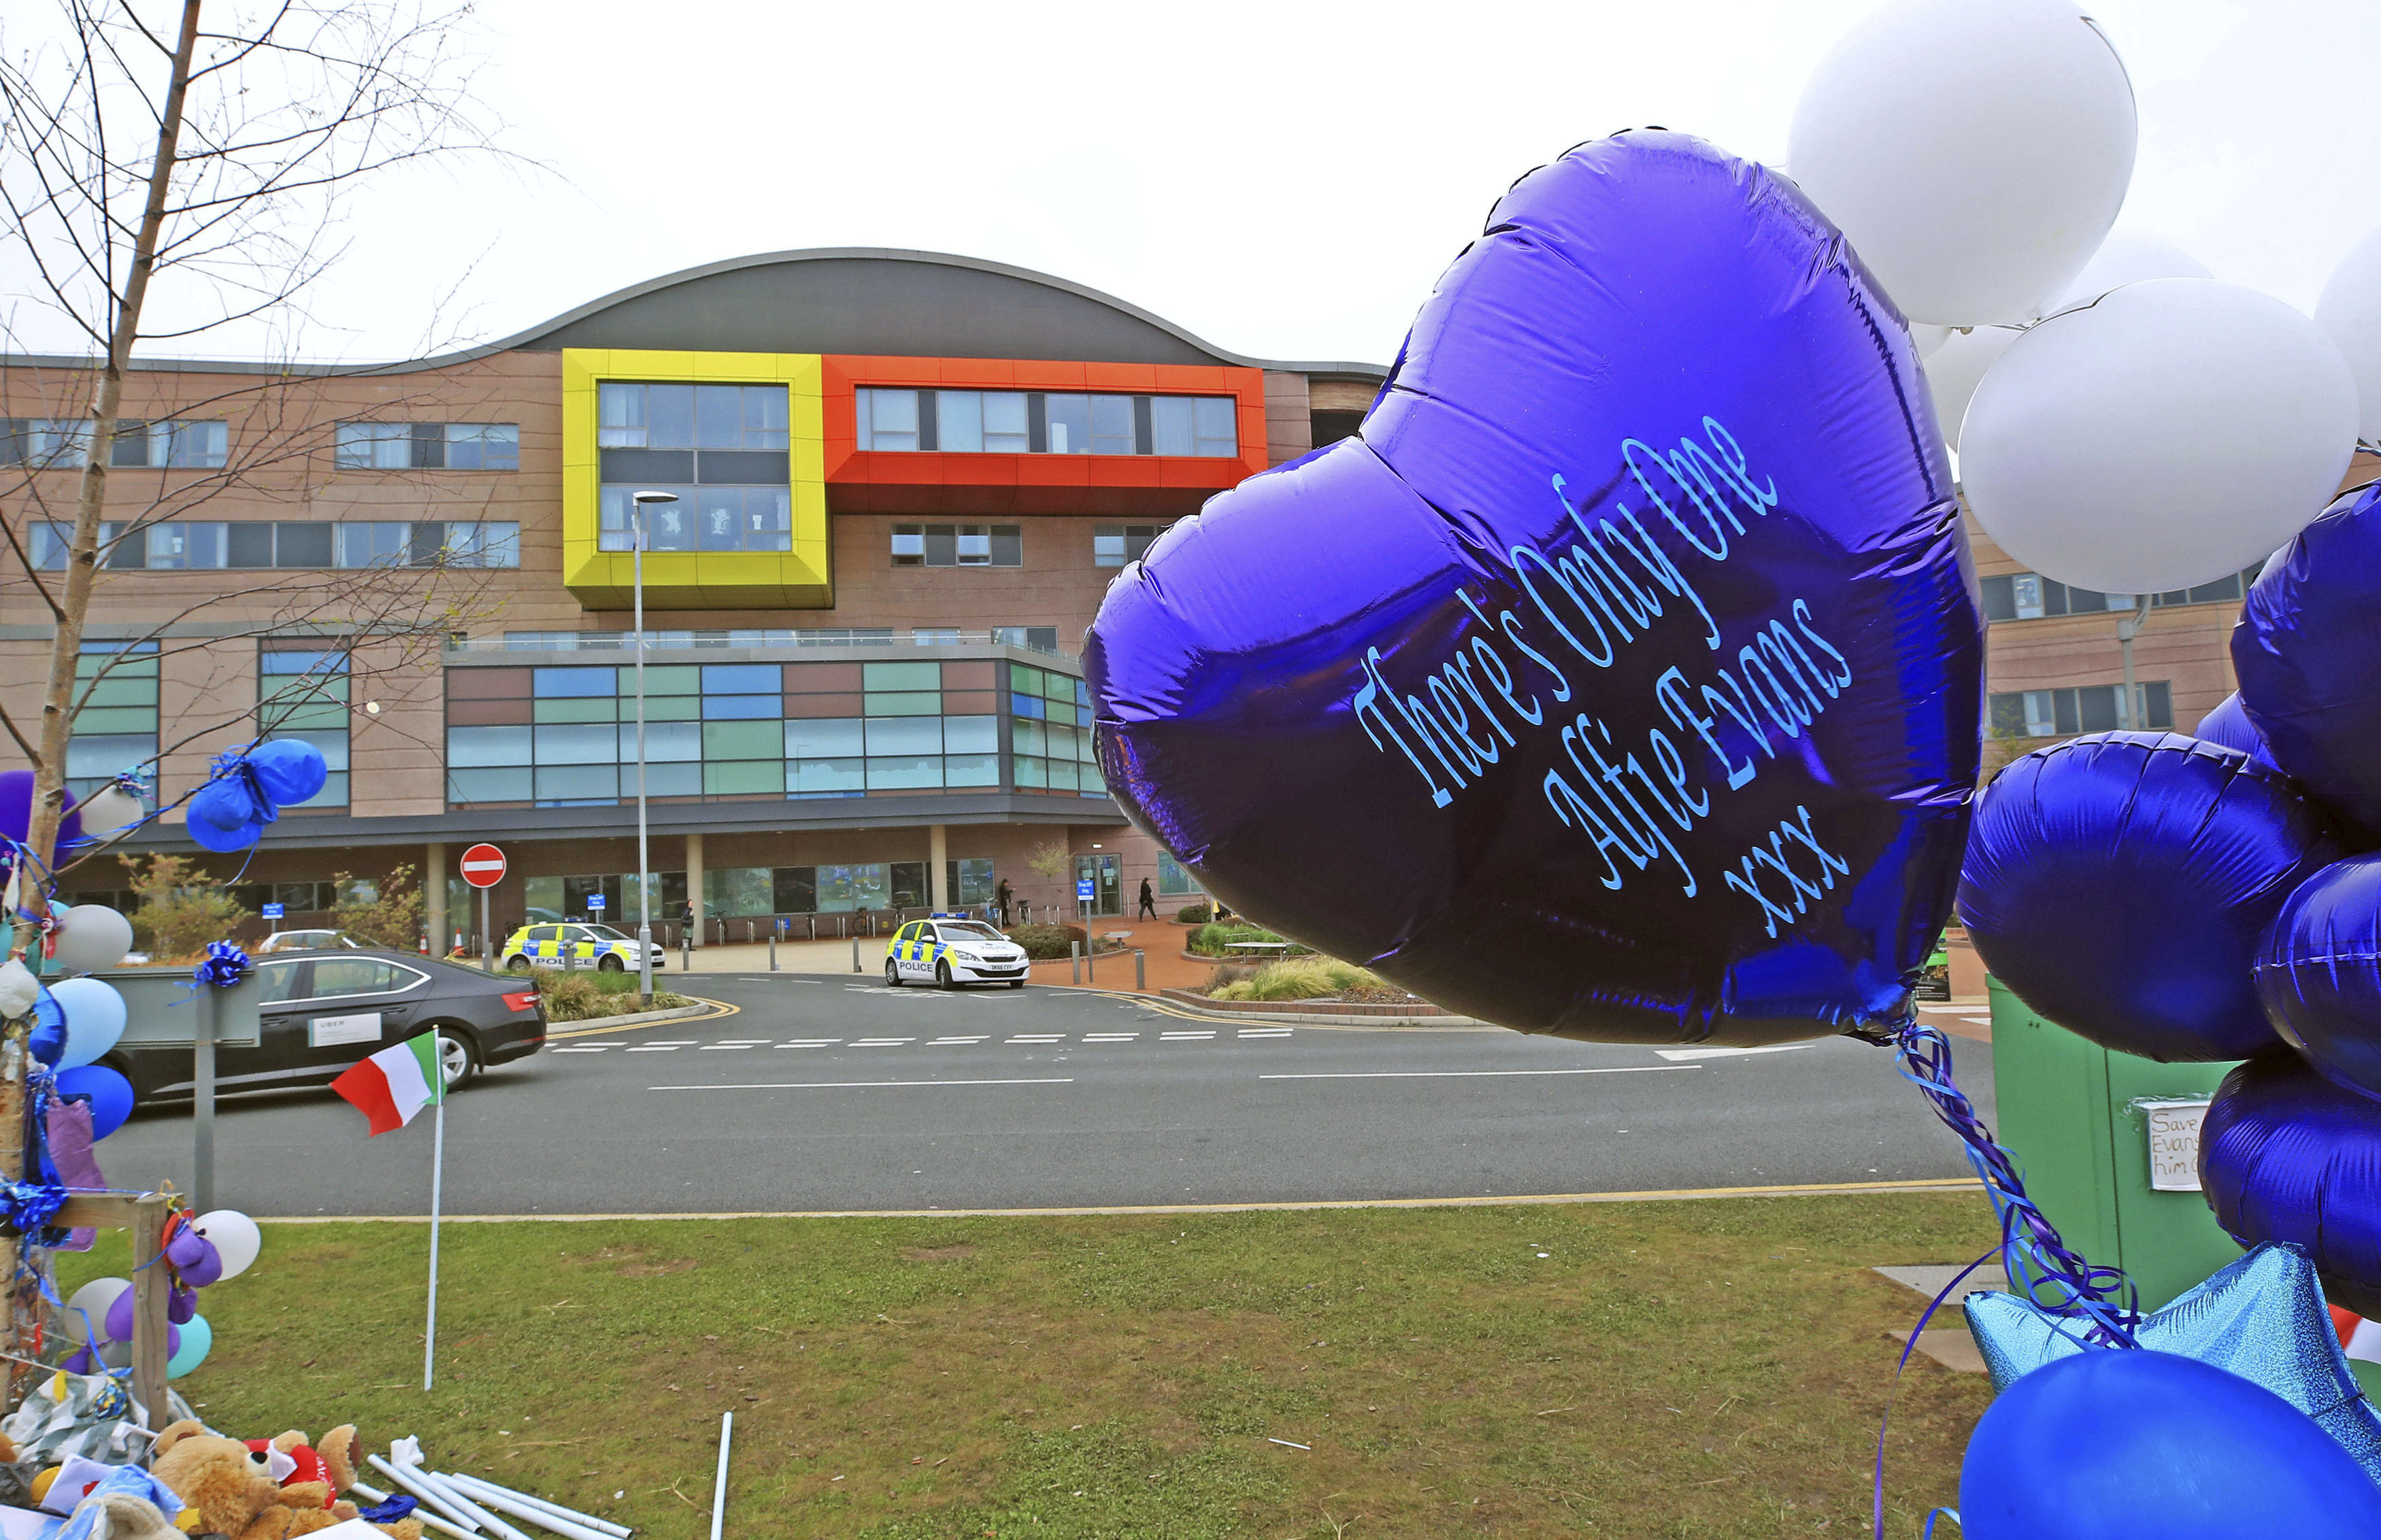 Balloons are placed outside Alder Hey Children's Hospital in Liverpool, England, where seriously ill Alfie Evans is a patient, Friday April 27, 2018.  Kate James and Tom Evans, the parents, said on Facebook that 23-month-old Alfie Evans, who had an incurable degenerative brain condition and was at the center of a legal battle over his treatment, died early morning Saturday April 28, 2018. (Peter Byrne/PA via AP)